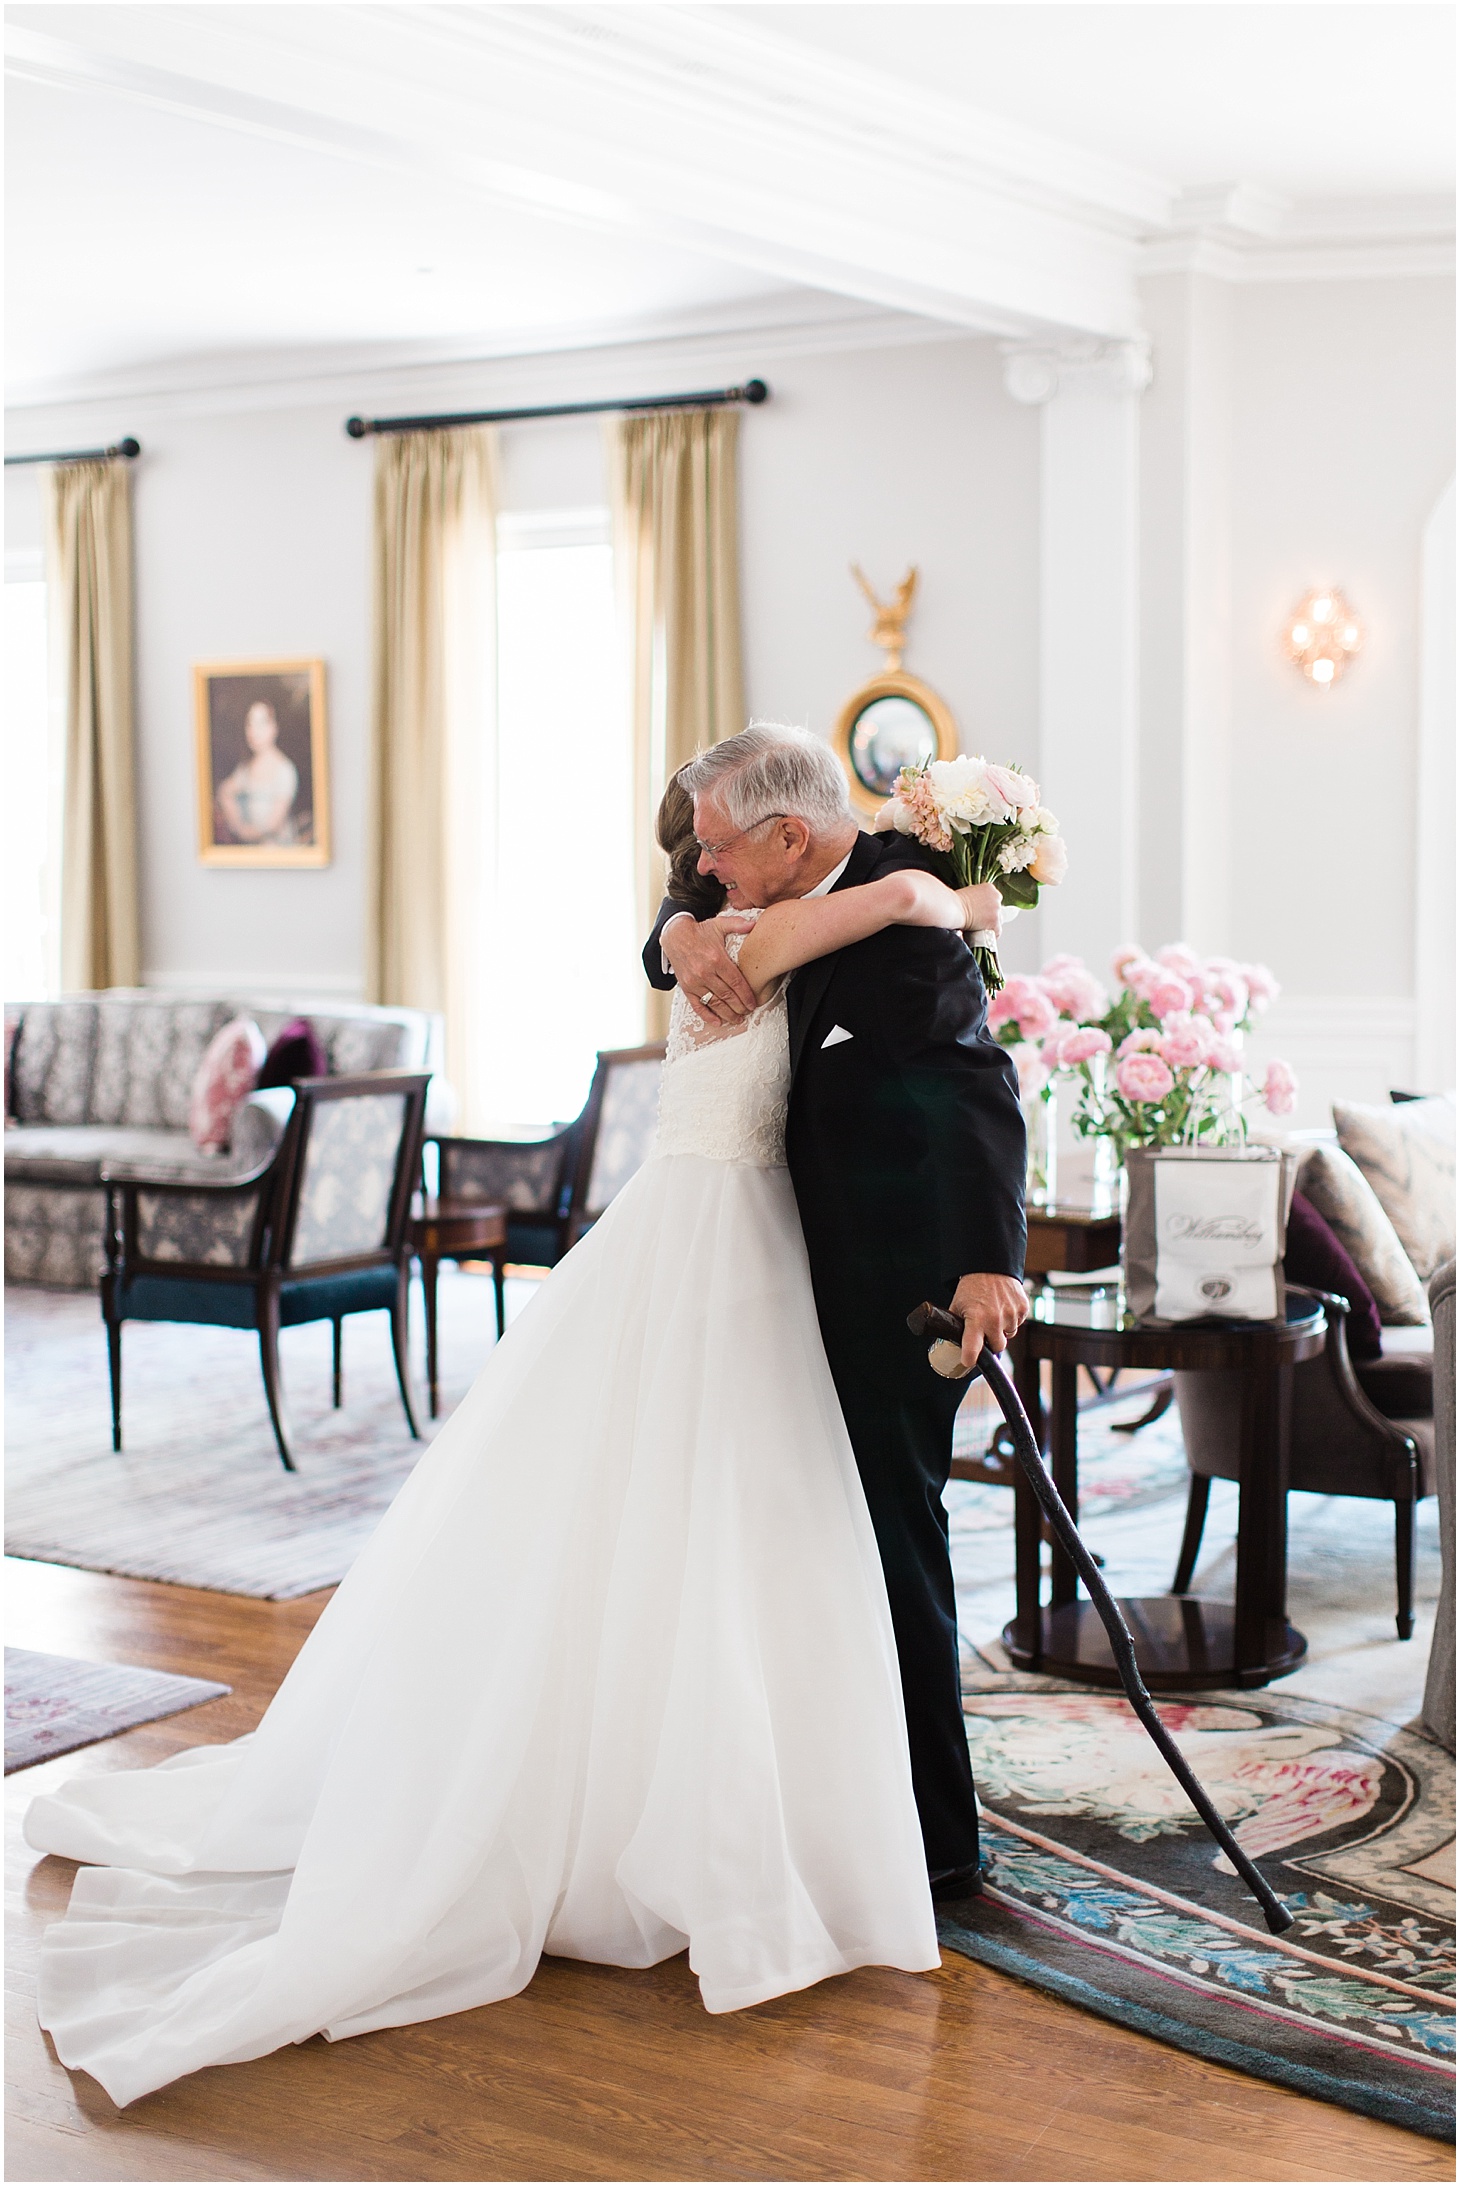 First Look with Father | Blush and Black Tie Wedding in Williamsburg, VA | Sarah Bradshaw Photography